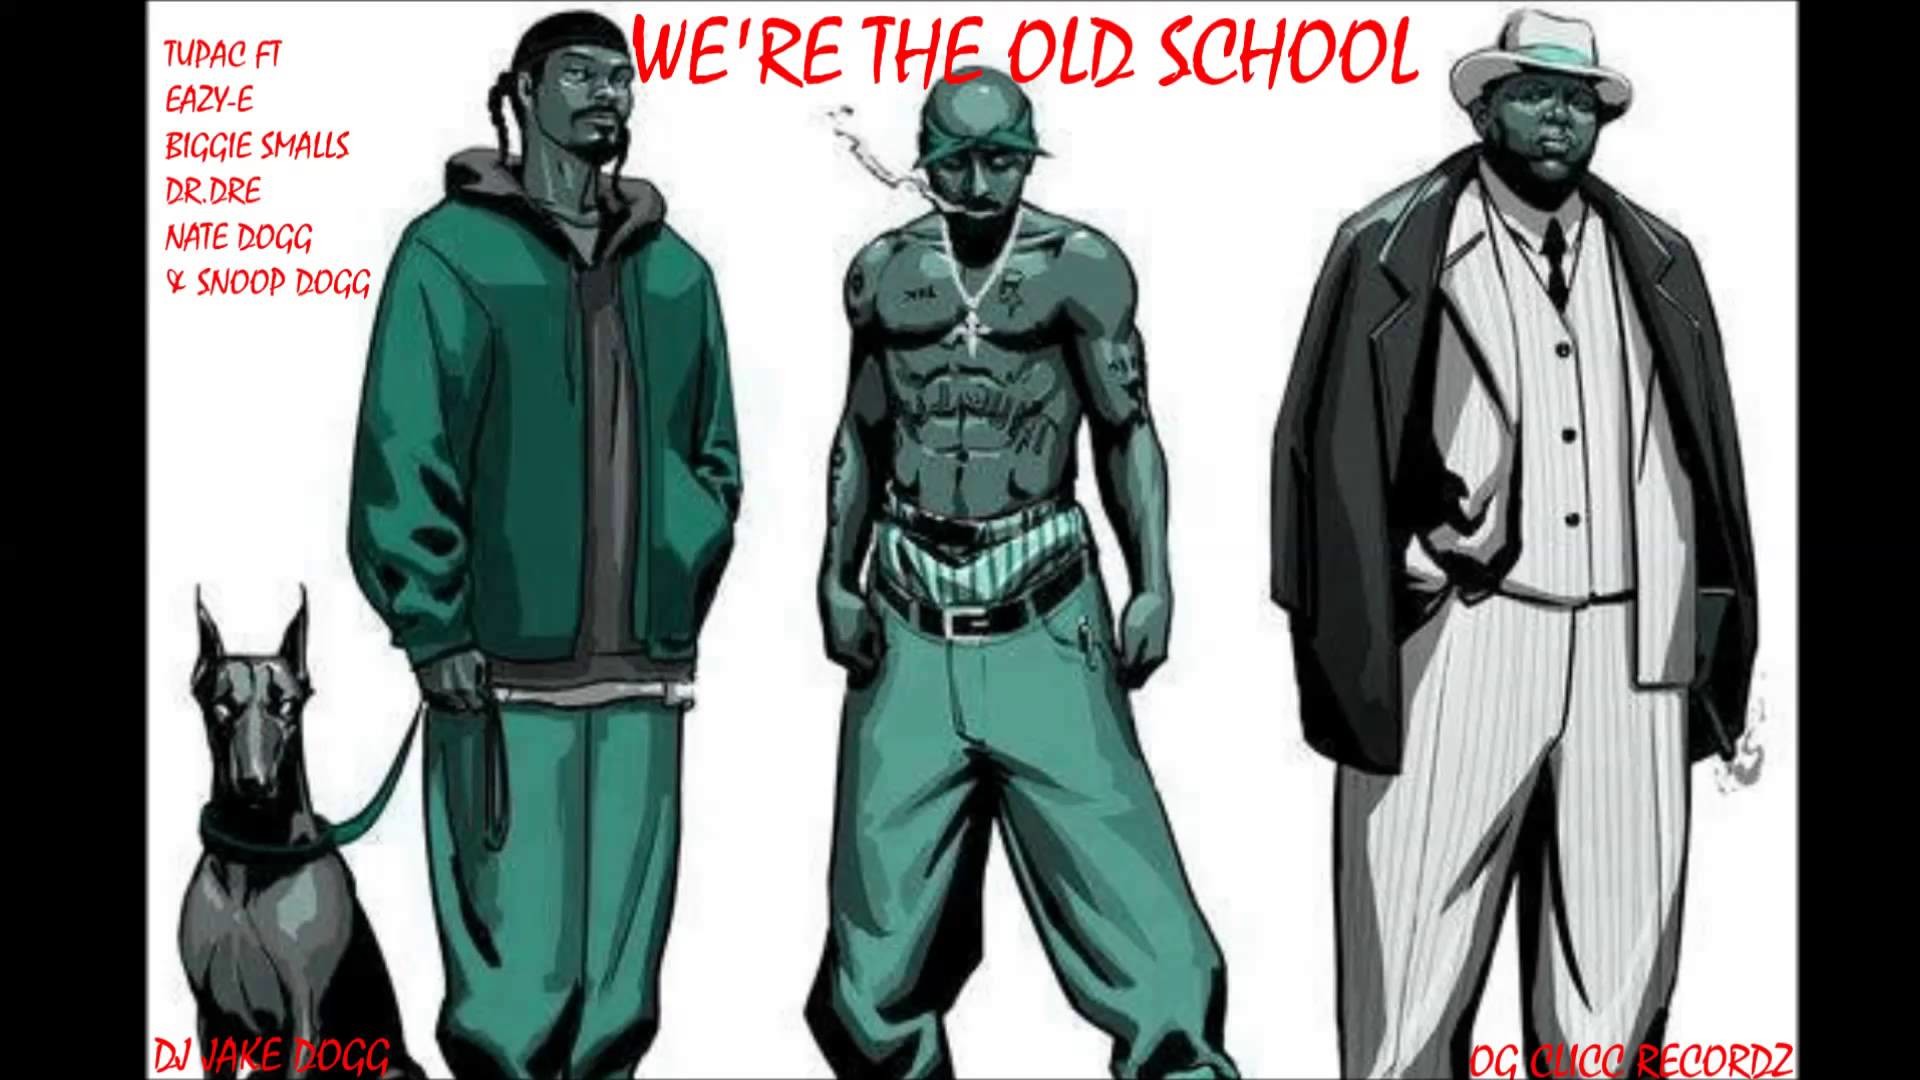 1920x1080 Tupac Ft Eazy E, Biggie Smalls, Dr Dre, Nate Dogg & Snoop Dogg - We're The  Old School - YouTube